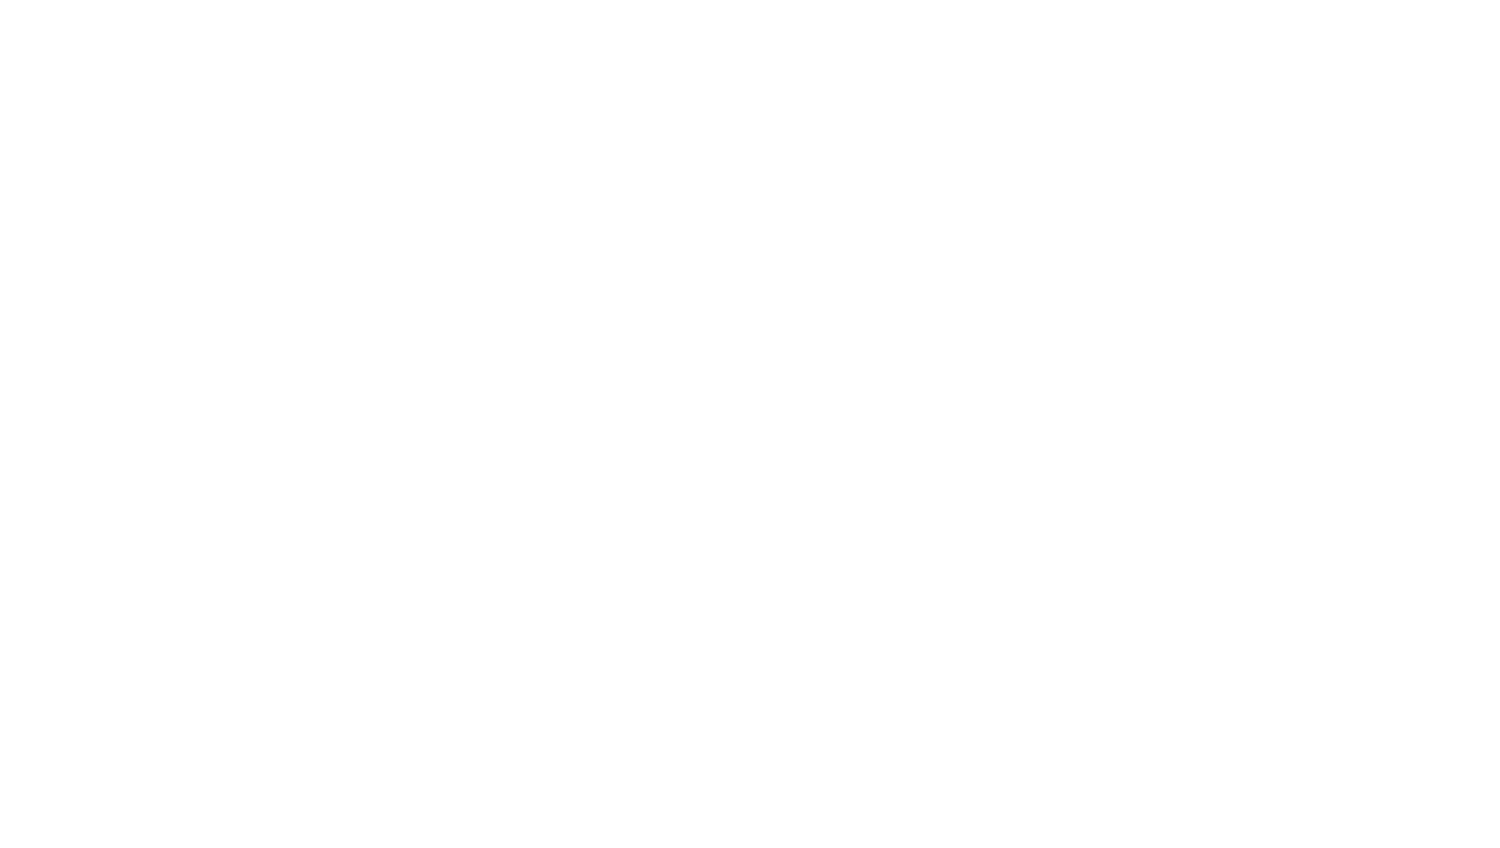 Community Link Consulting